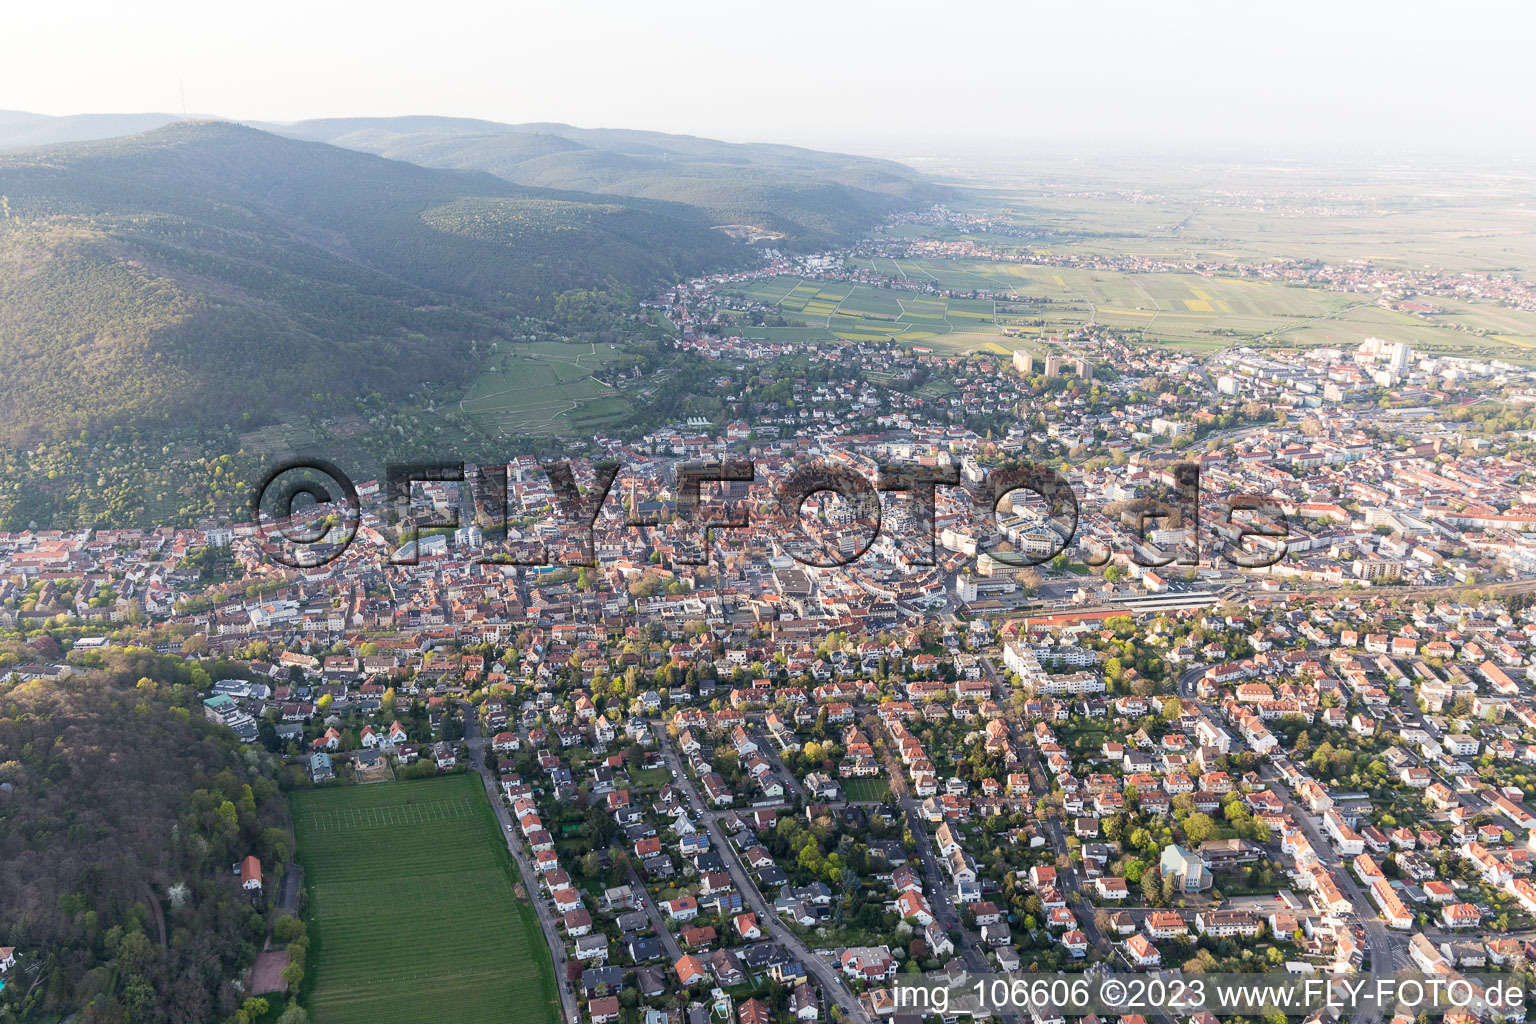 Neustadt an der Weinstraße in the state Rhineland-Palatinate, Germany seen from a drone